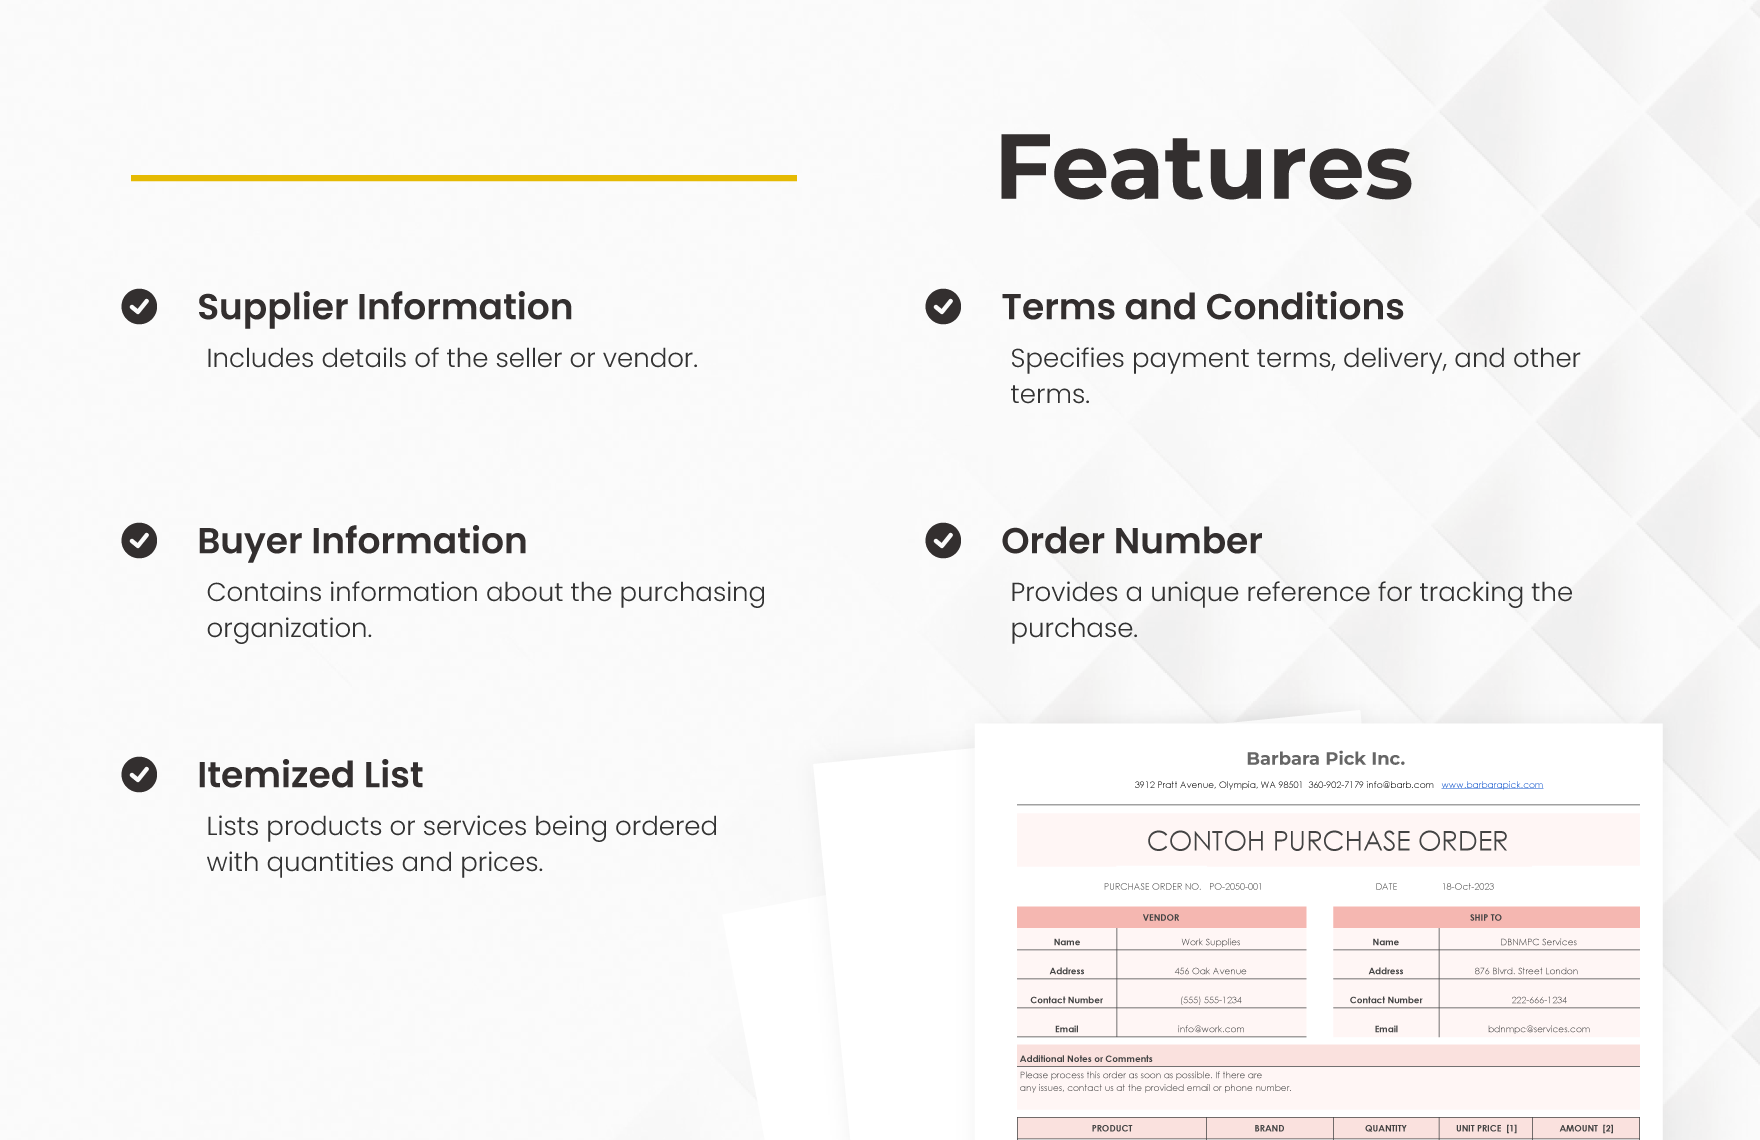 Contoh Purchase Order Template